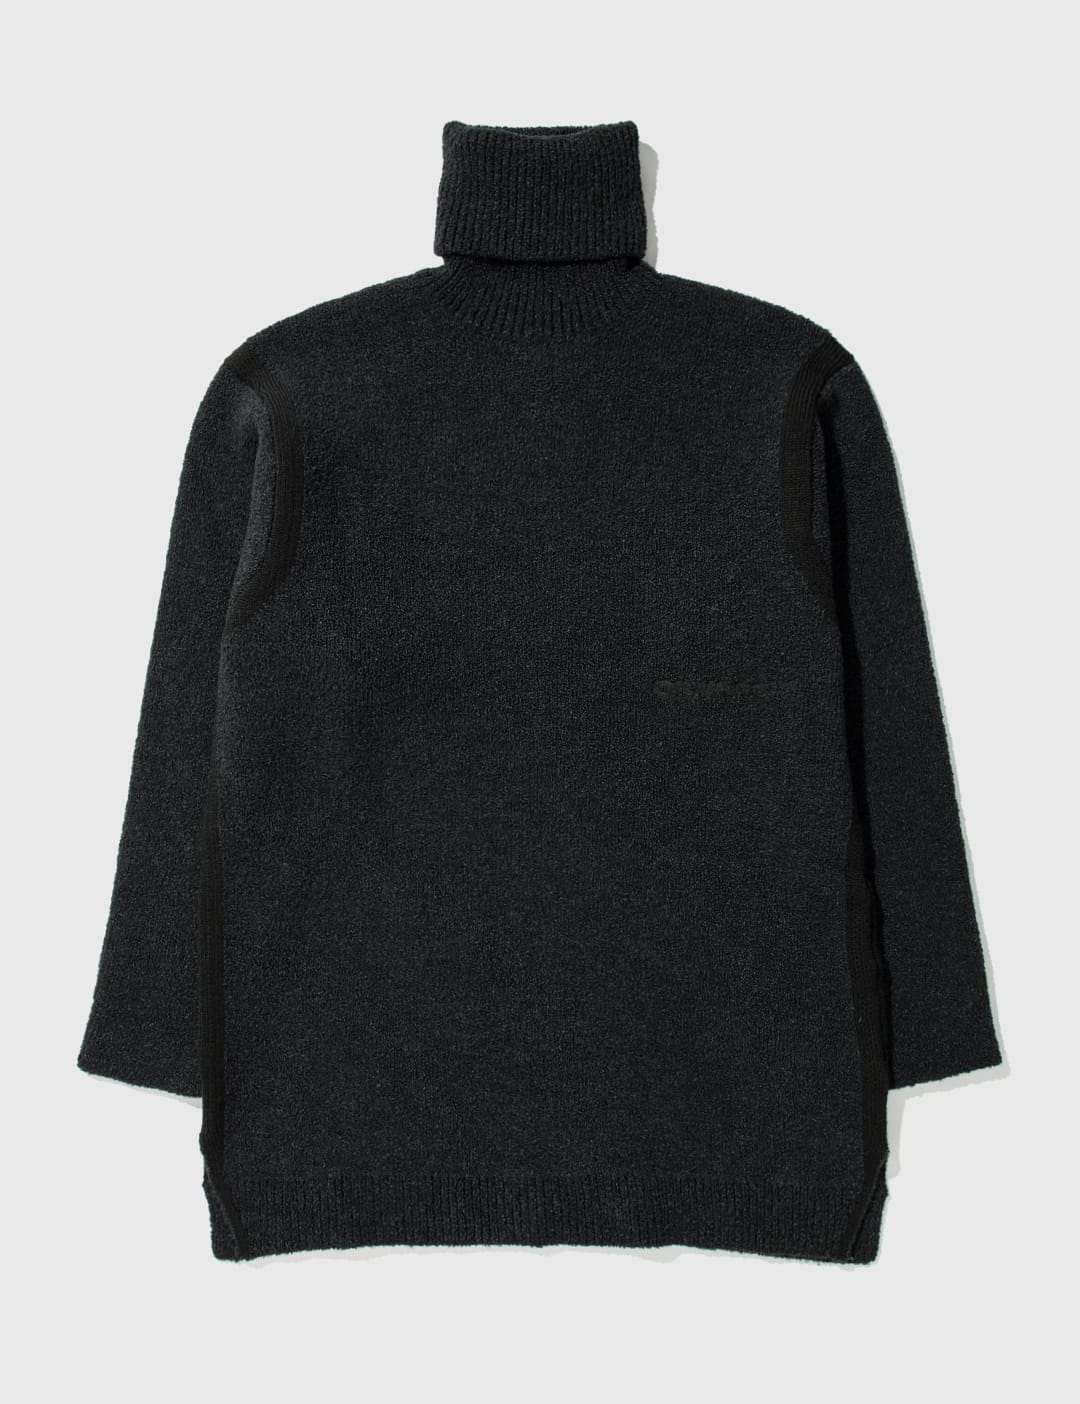 Off-White Micro Boucle Knit Turtleneck Sweater